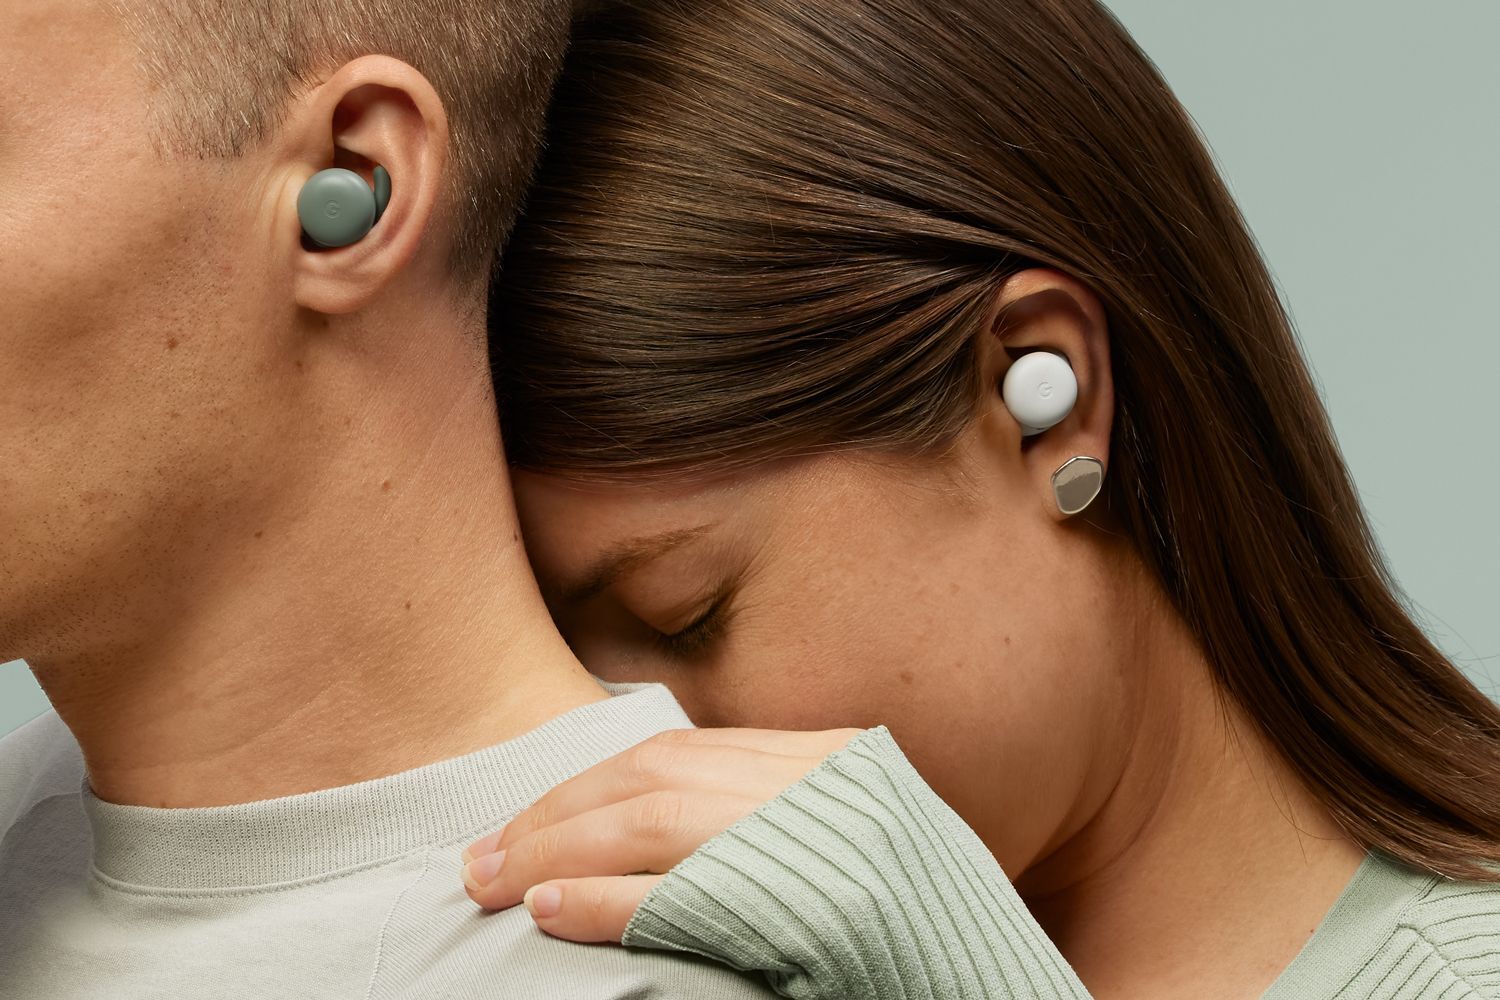 The best budget wireless earbuds - check out our handpicked selection